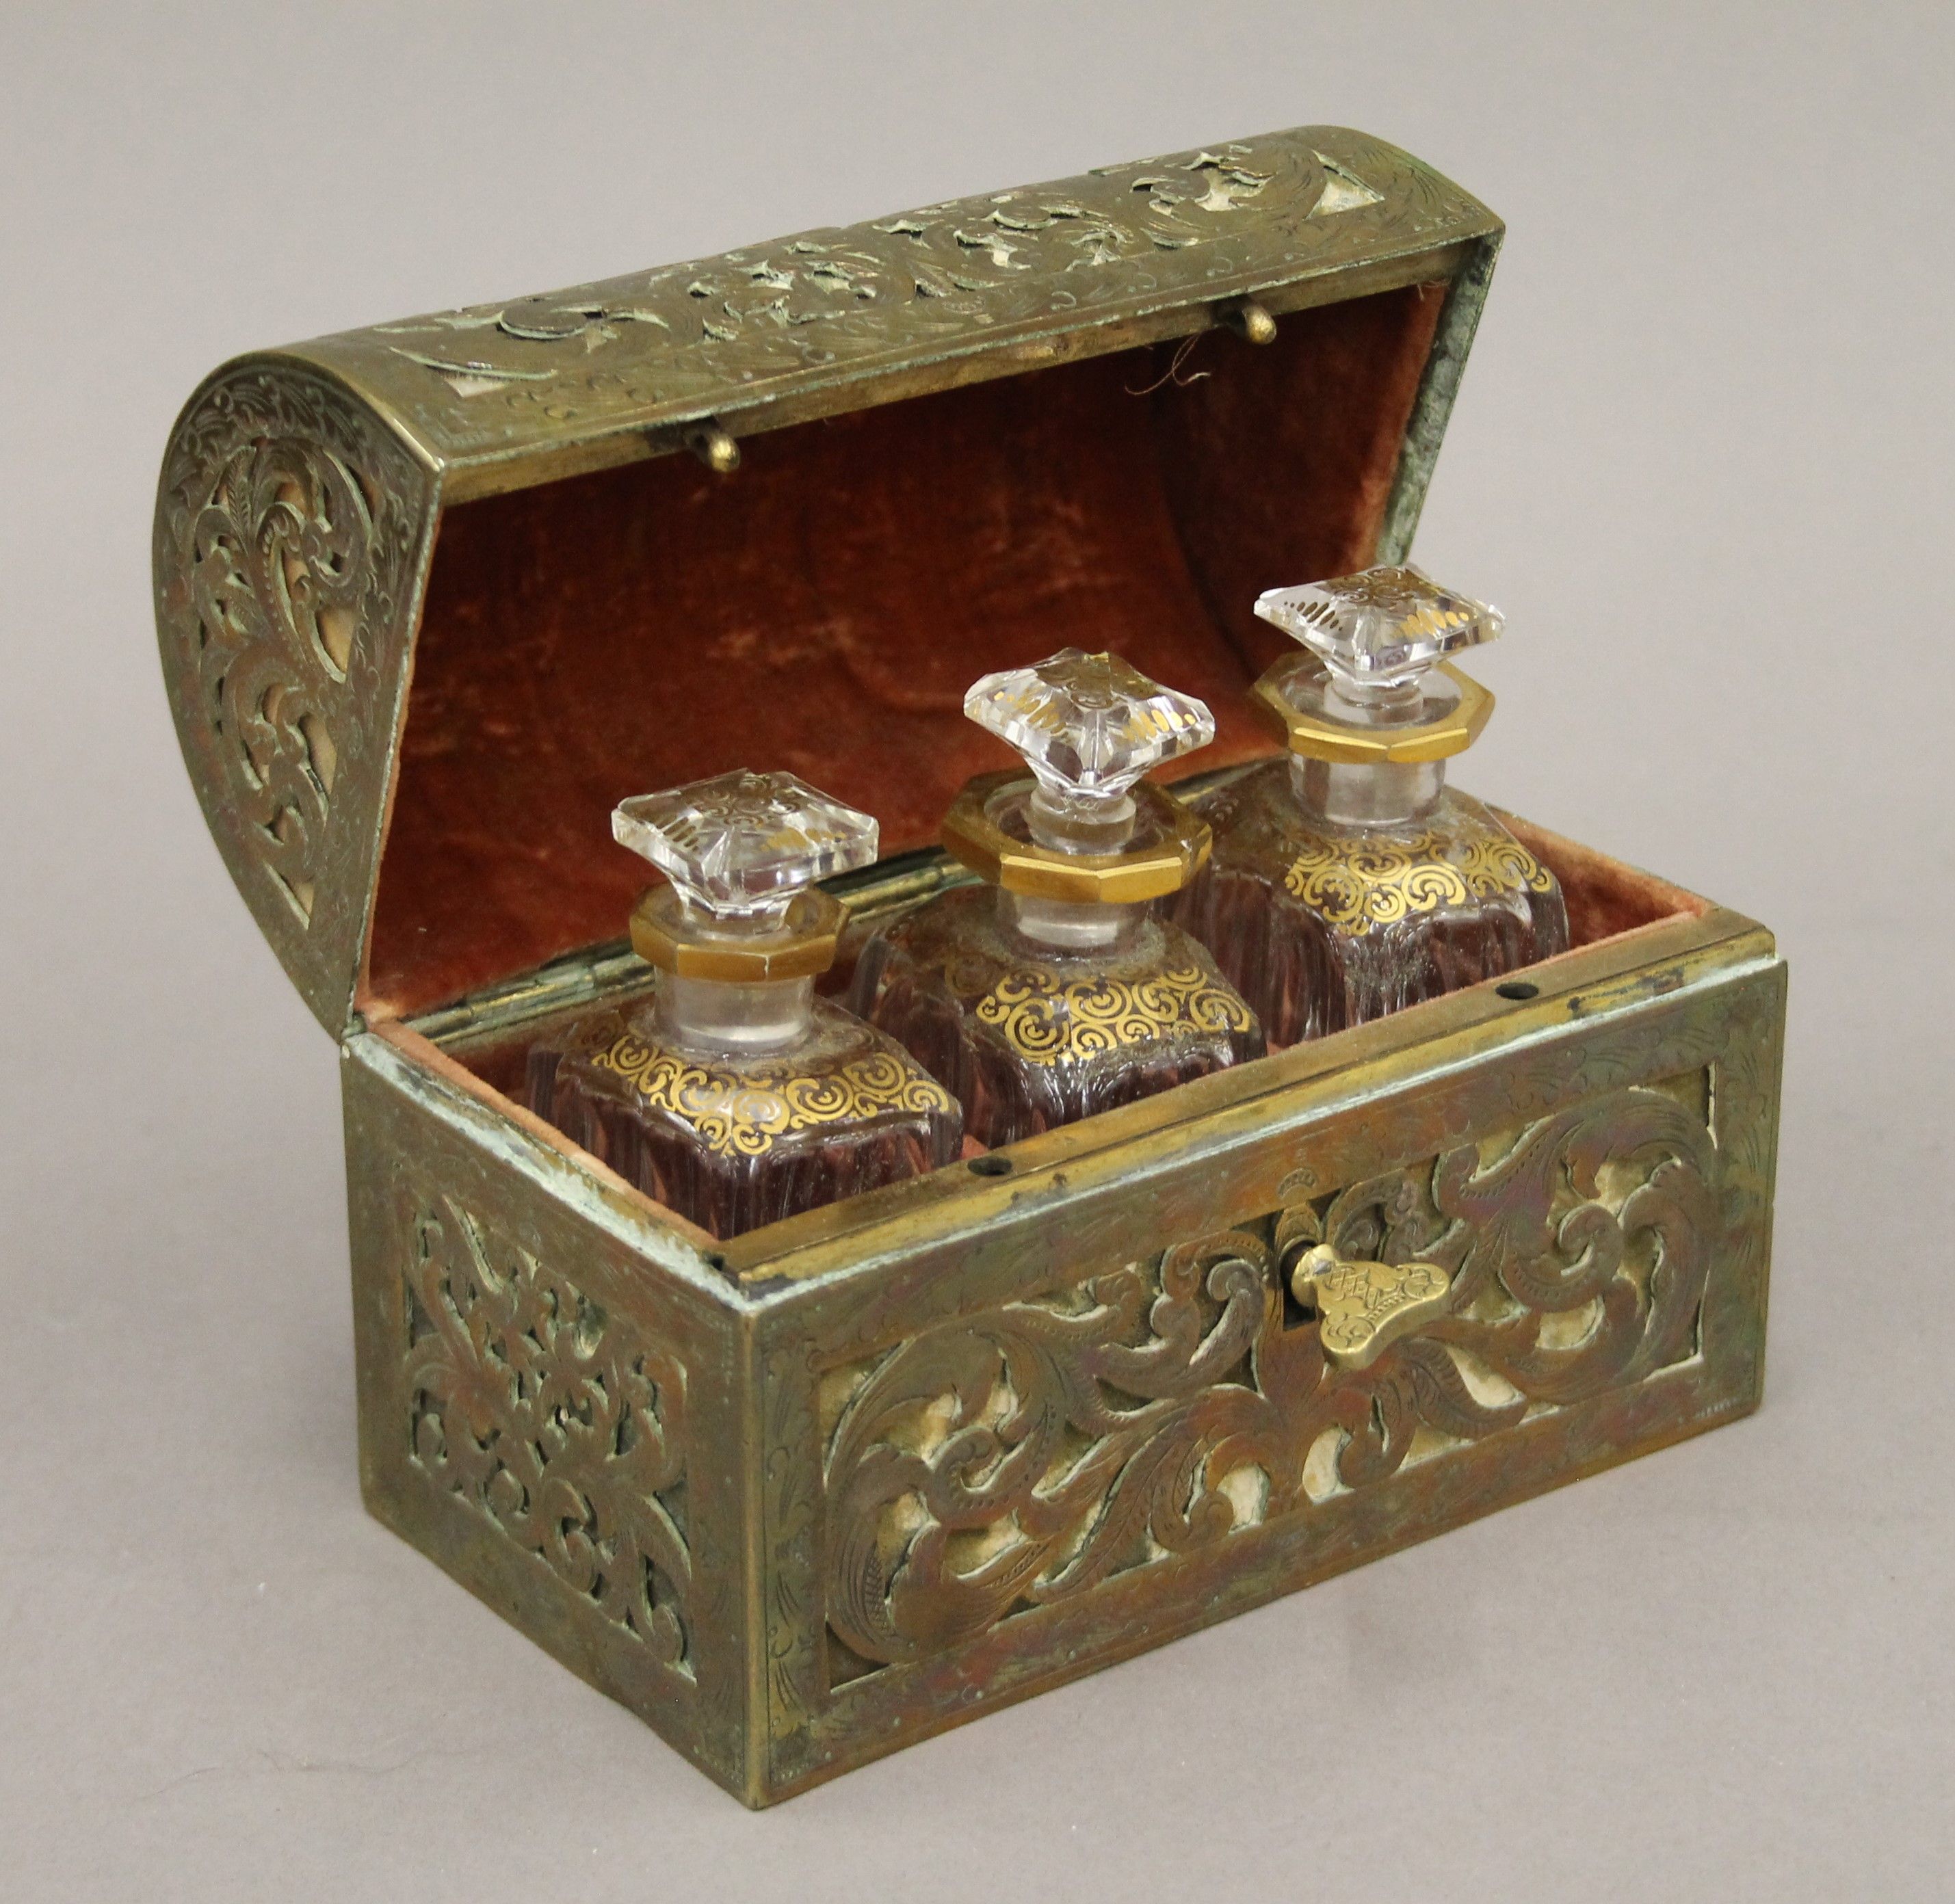 An antique dome-shaped pierced brass velvet-lined perfume casket containing three gilded cut glass